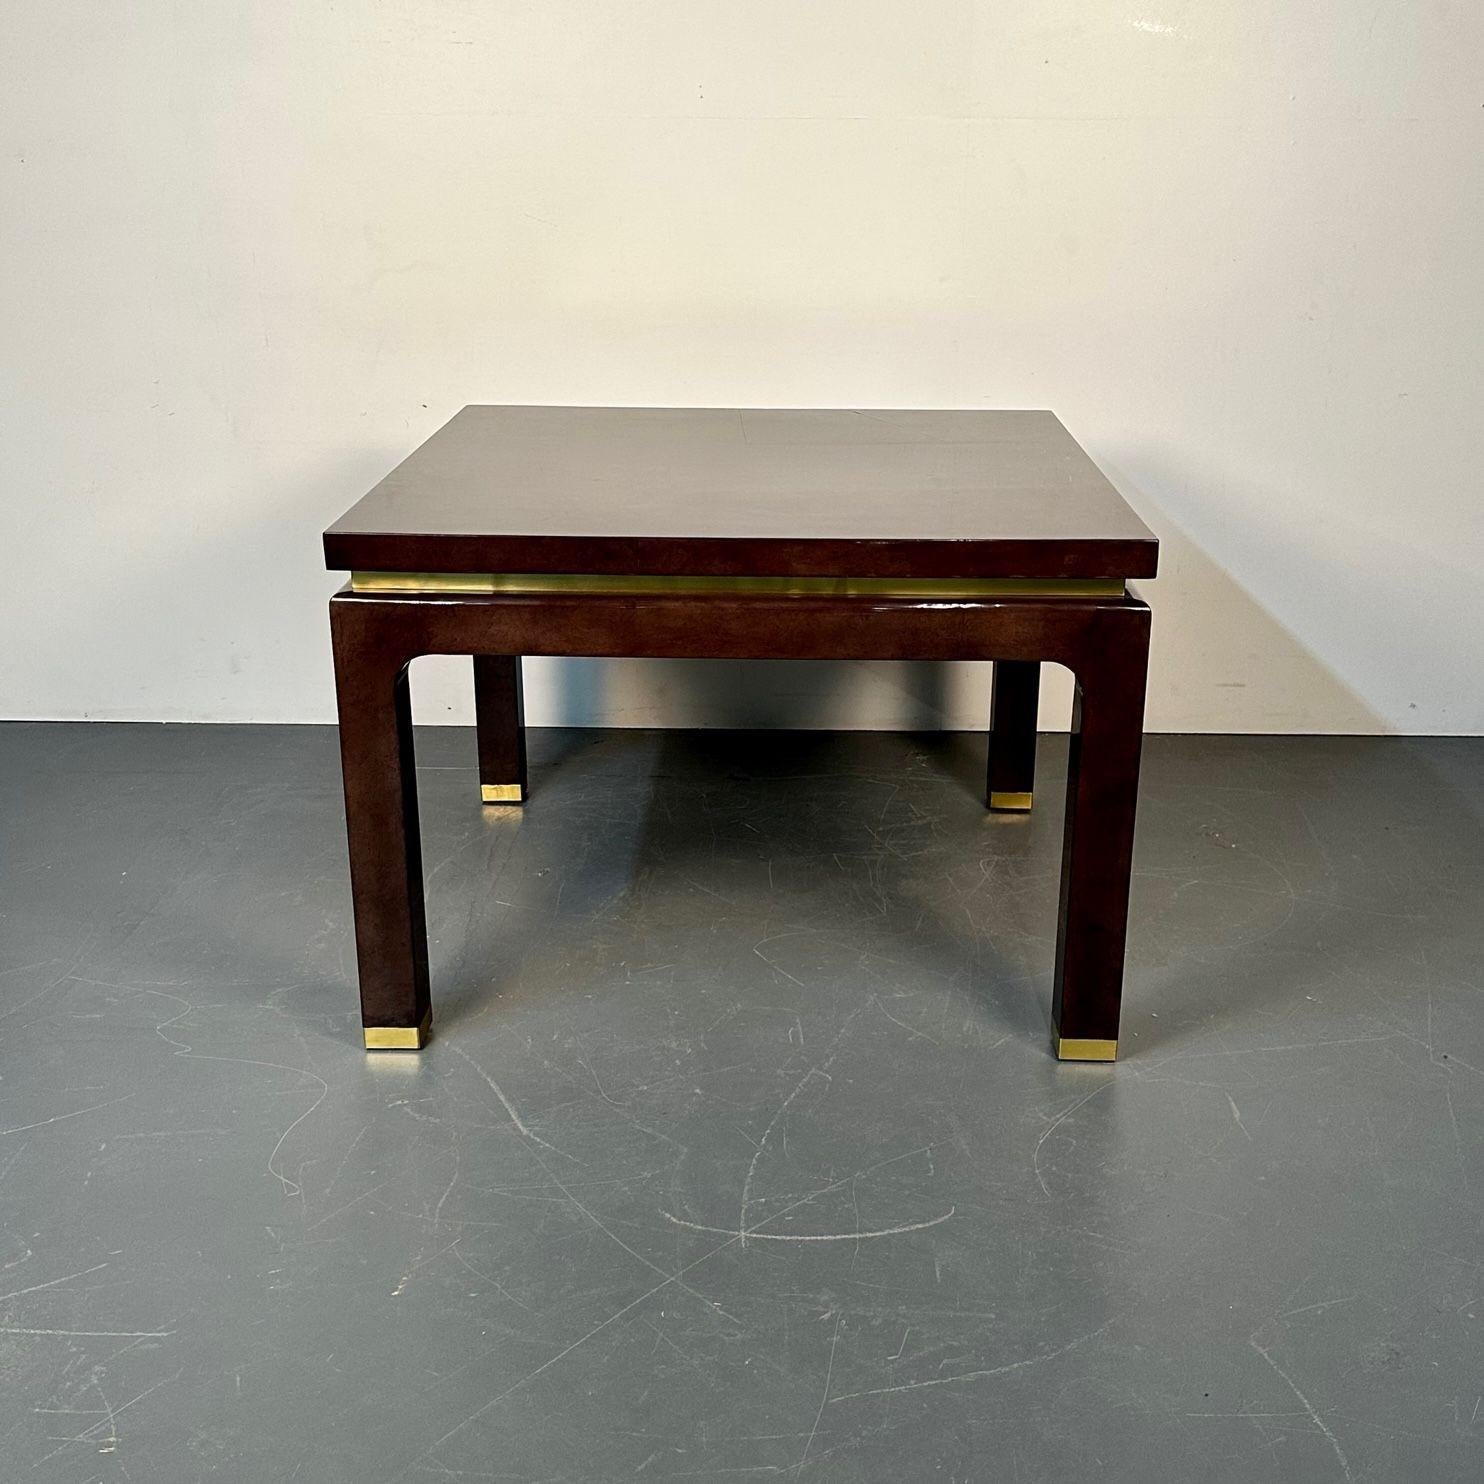 Mid-Century Modern square game / center table, lacquer and brass, springer style
 
Square game or breakfast table having a brown faux tortoise lacquer finish with brass accents along the sides and at the bottom of the legs. This table is